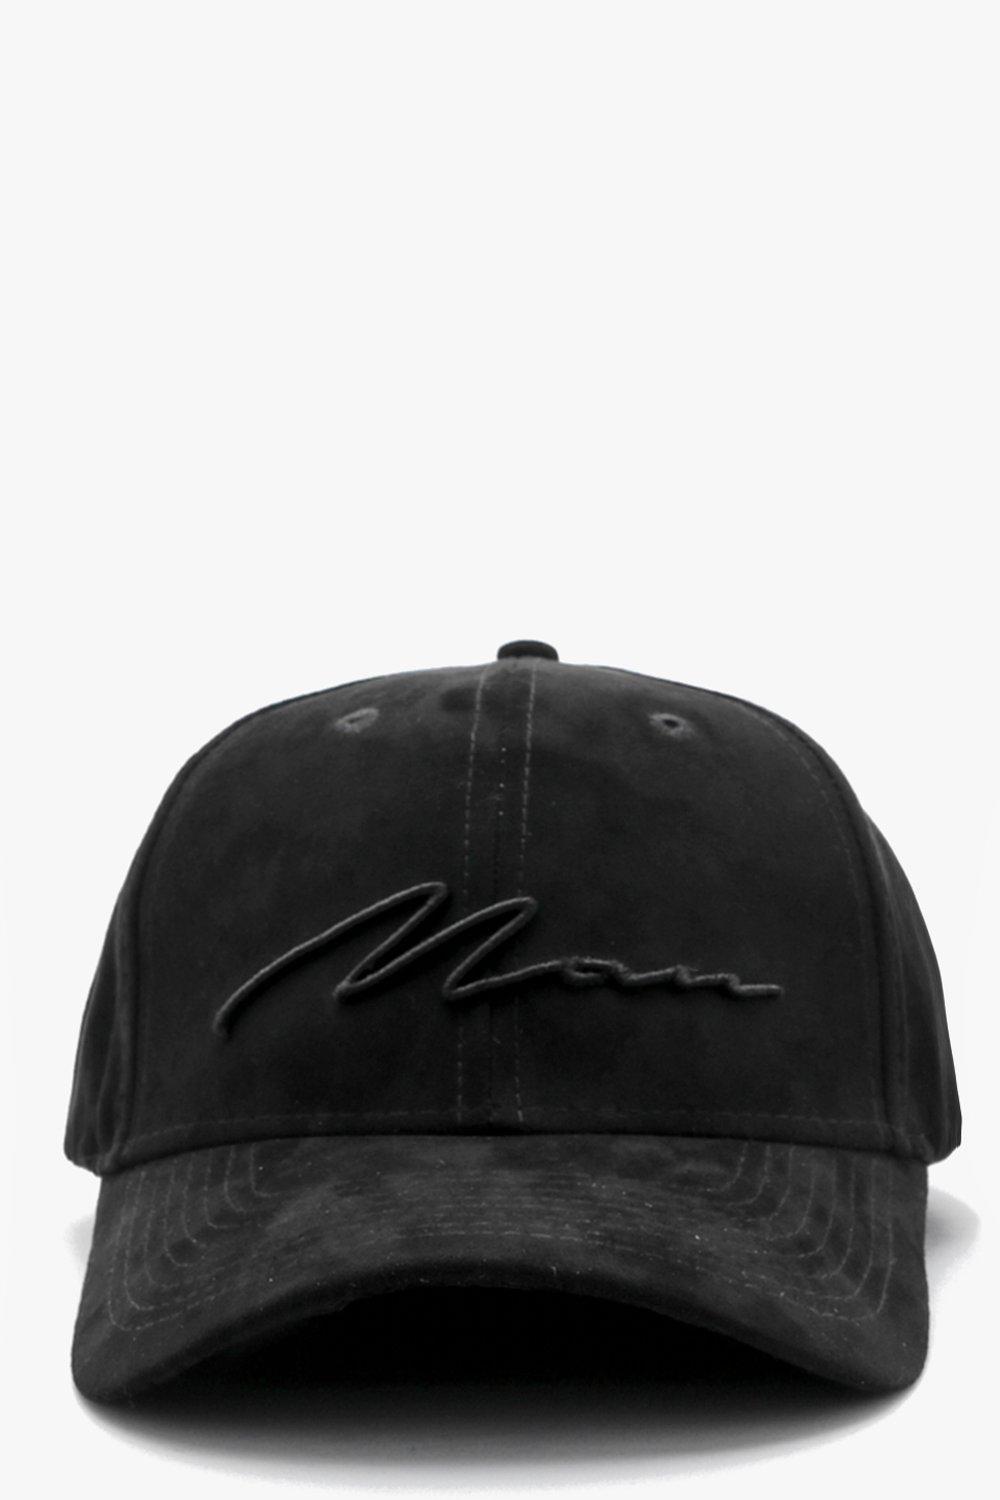 BoohooMAN 3d Man Script Embroidered Suede Cap in Black for Men - Lyst